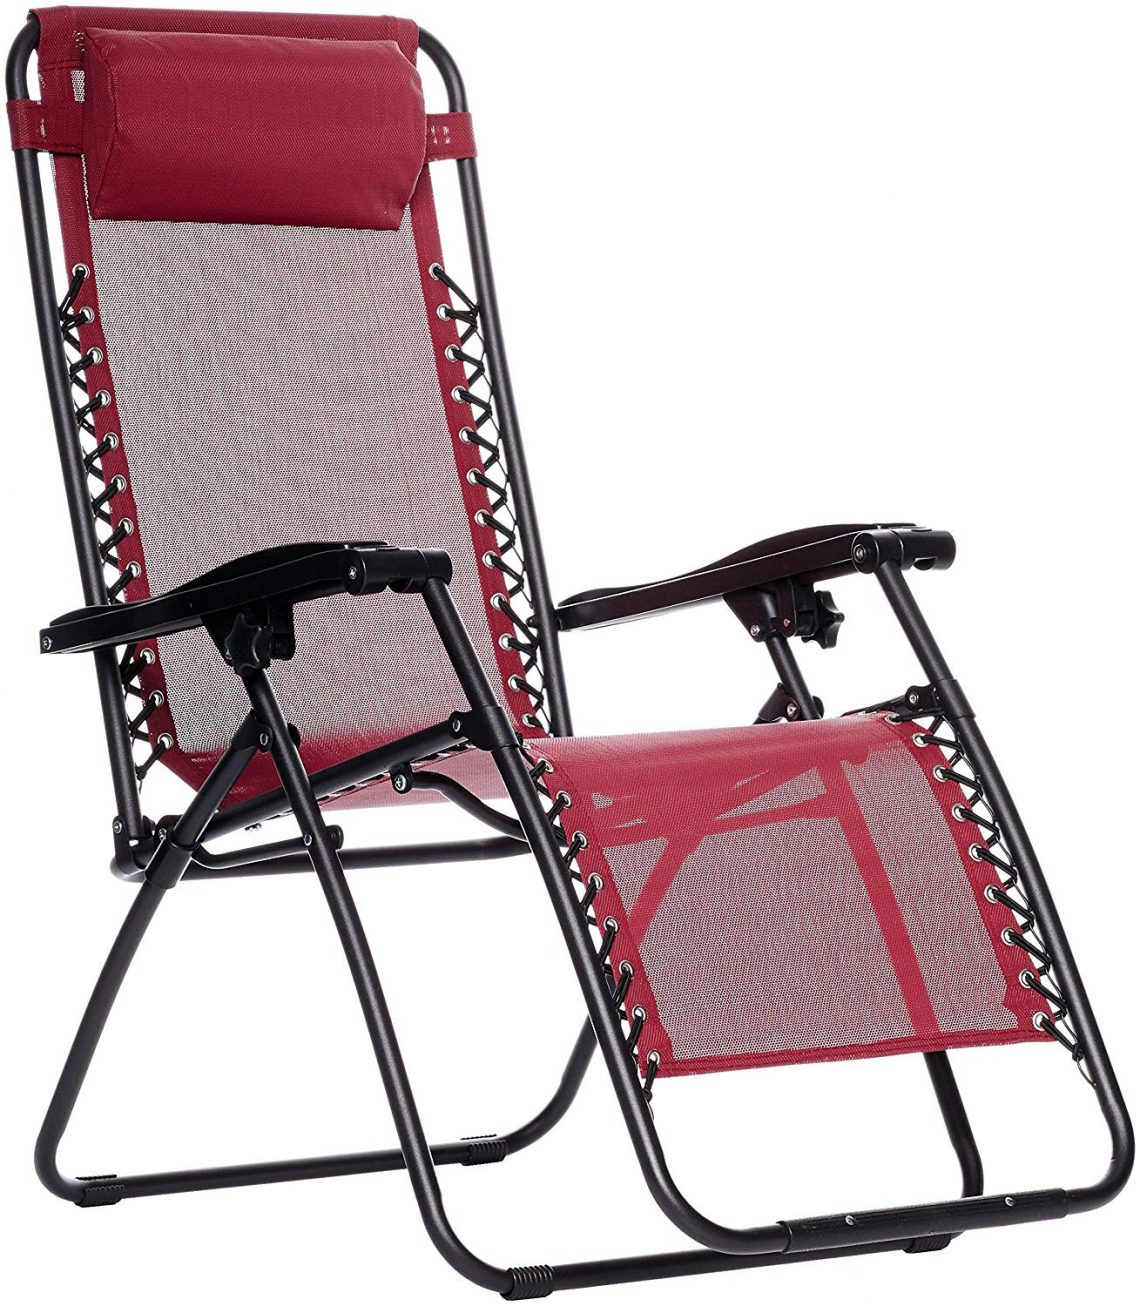 Top 10 Best Zero Gravity Chairs in 2022 Reviews | Guide